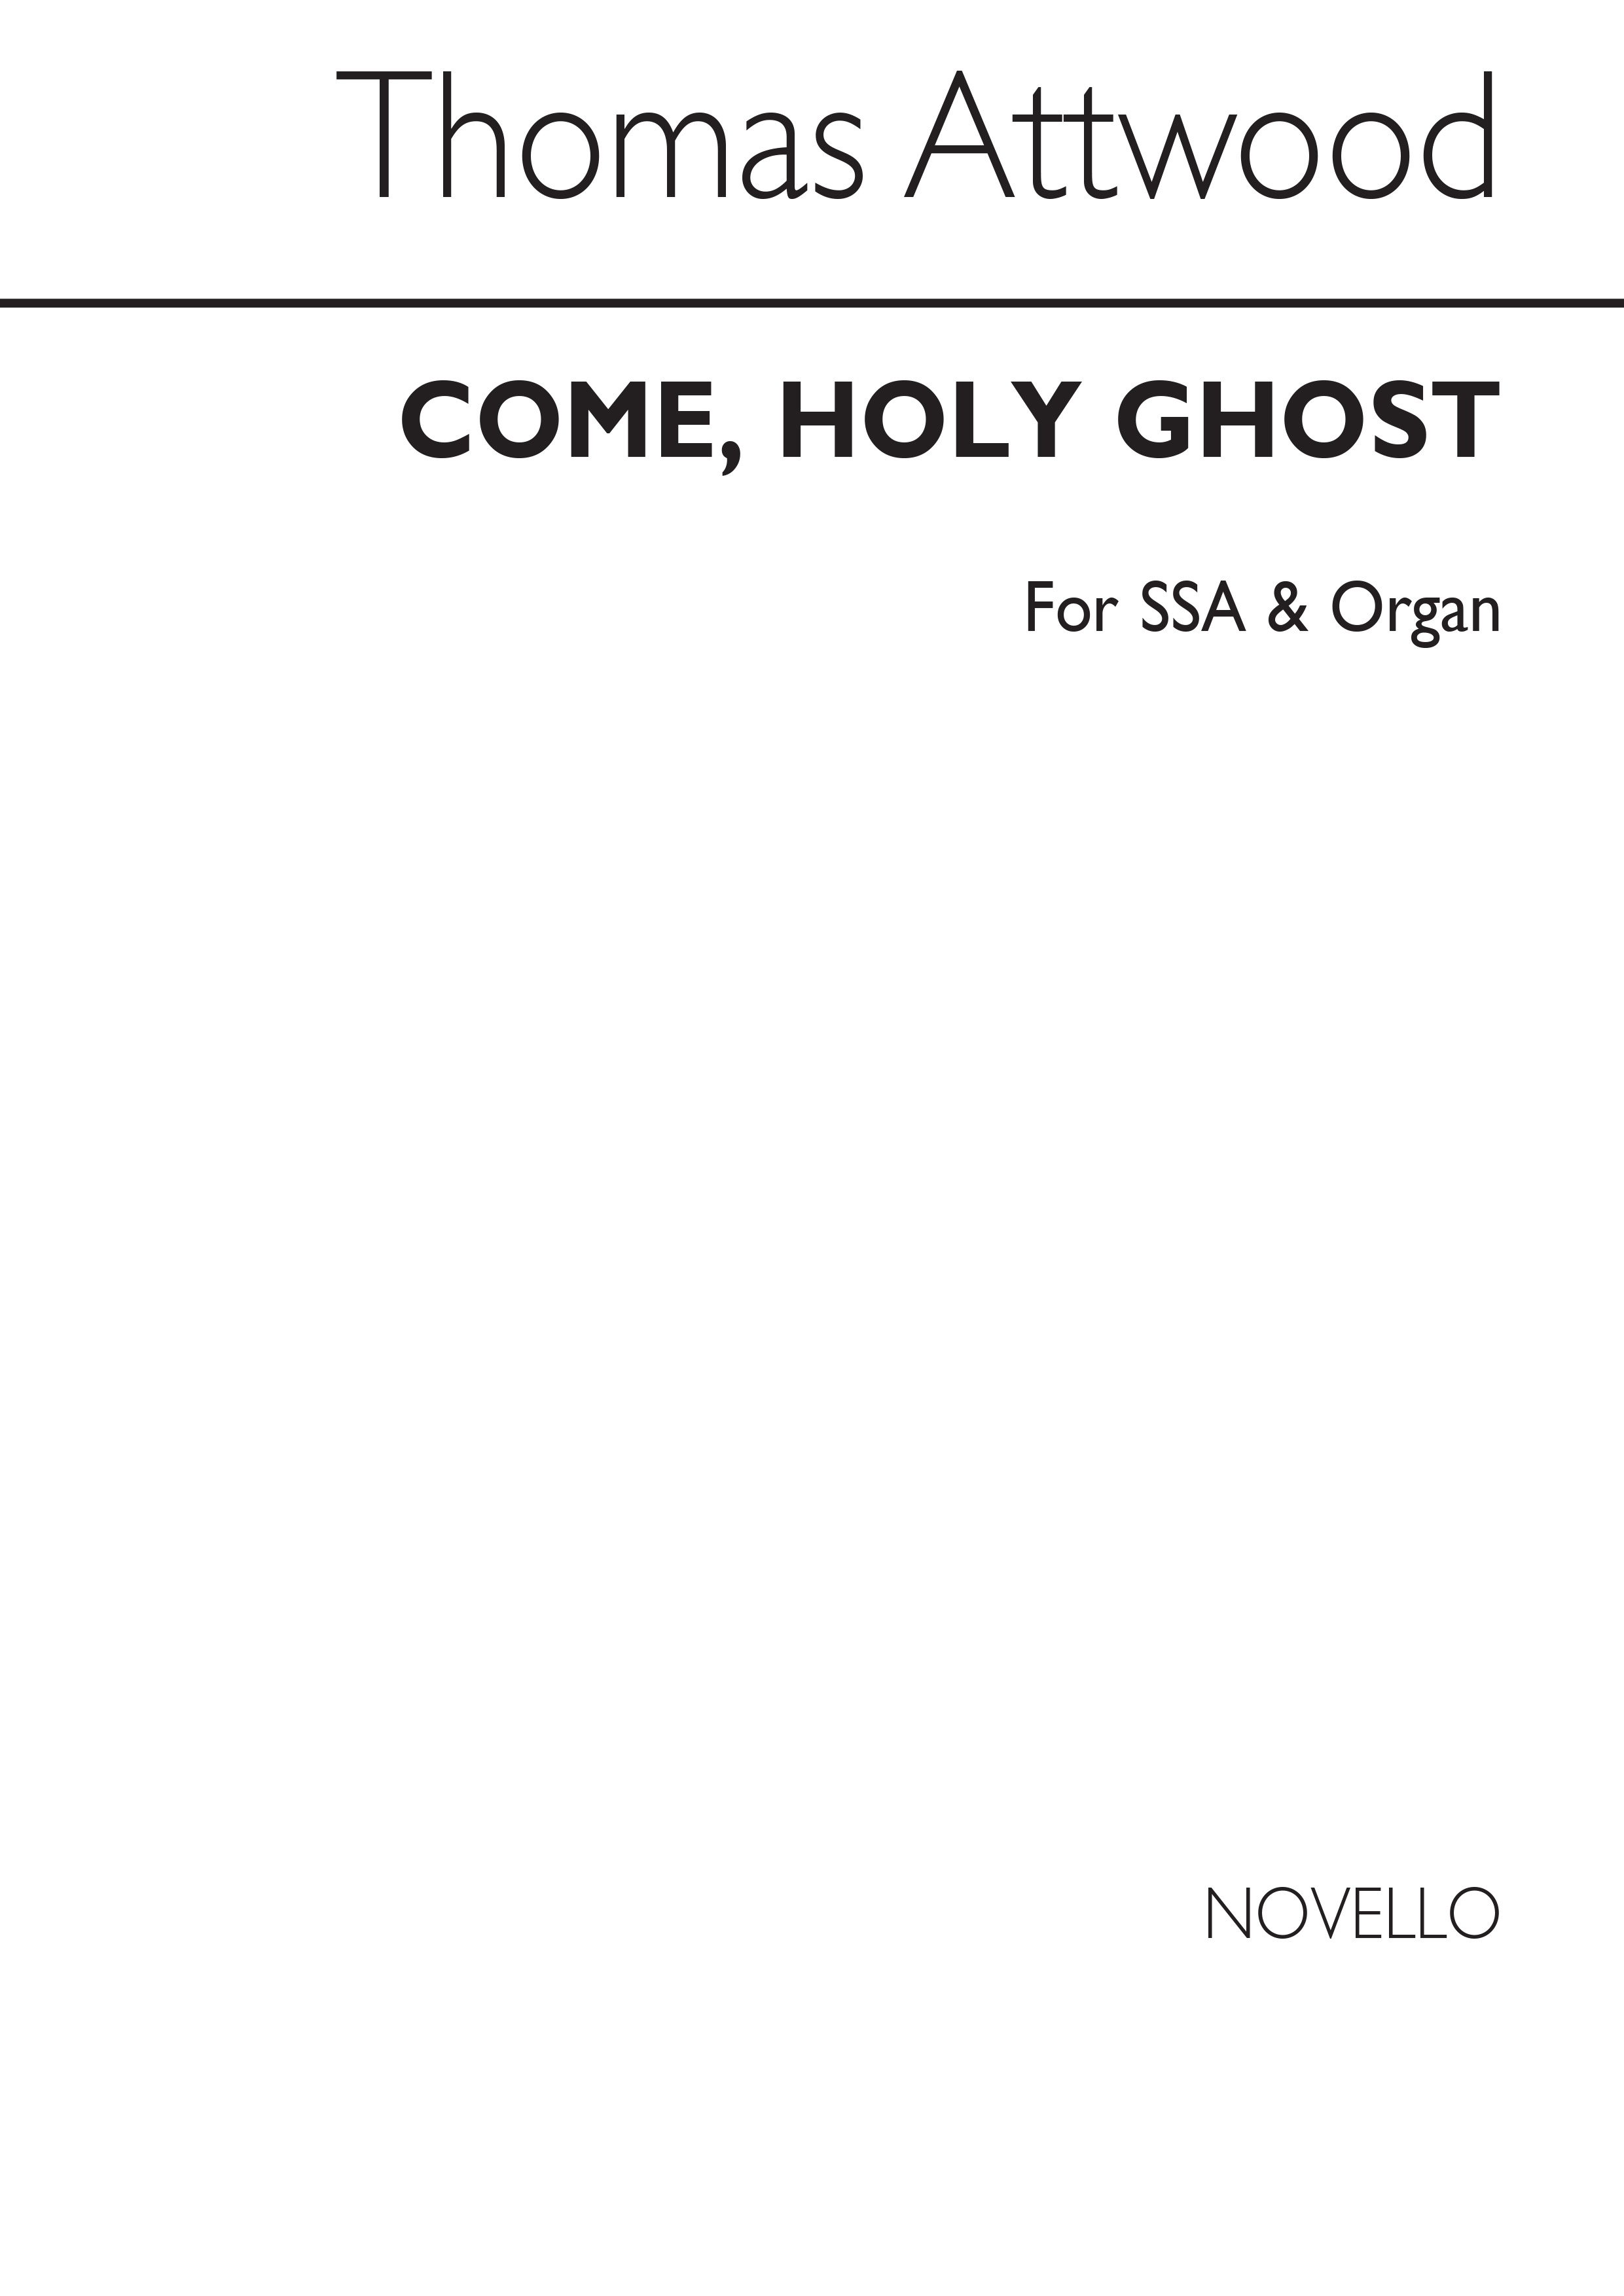 Thomas Attwood: Come, Holy Ghost (SSA)